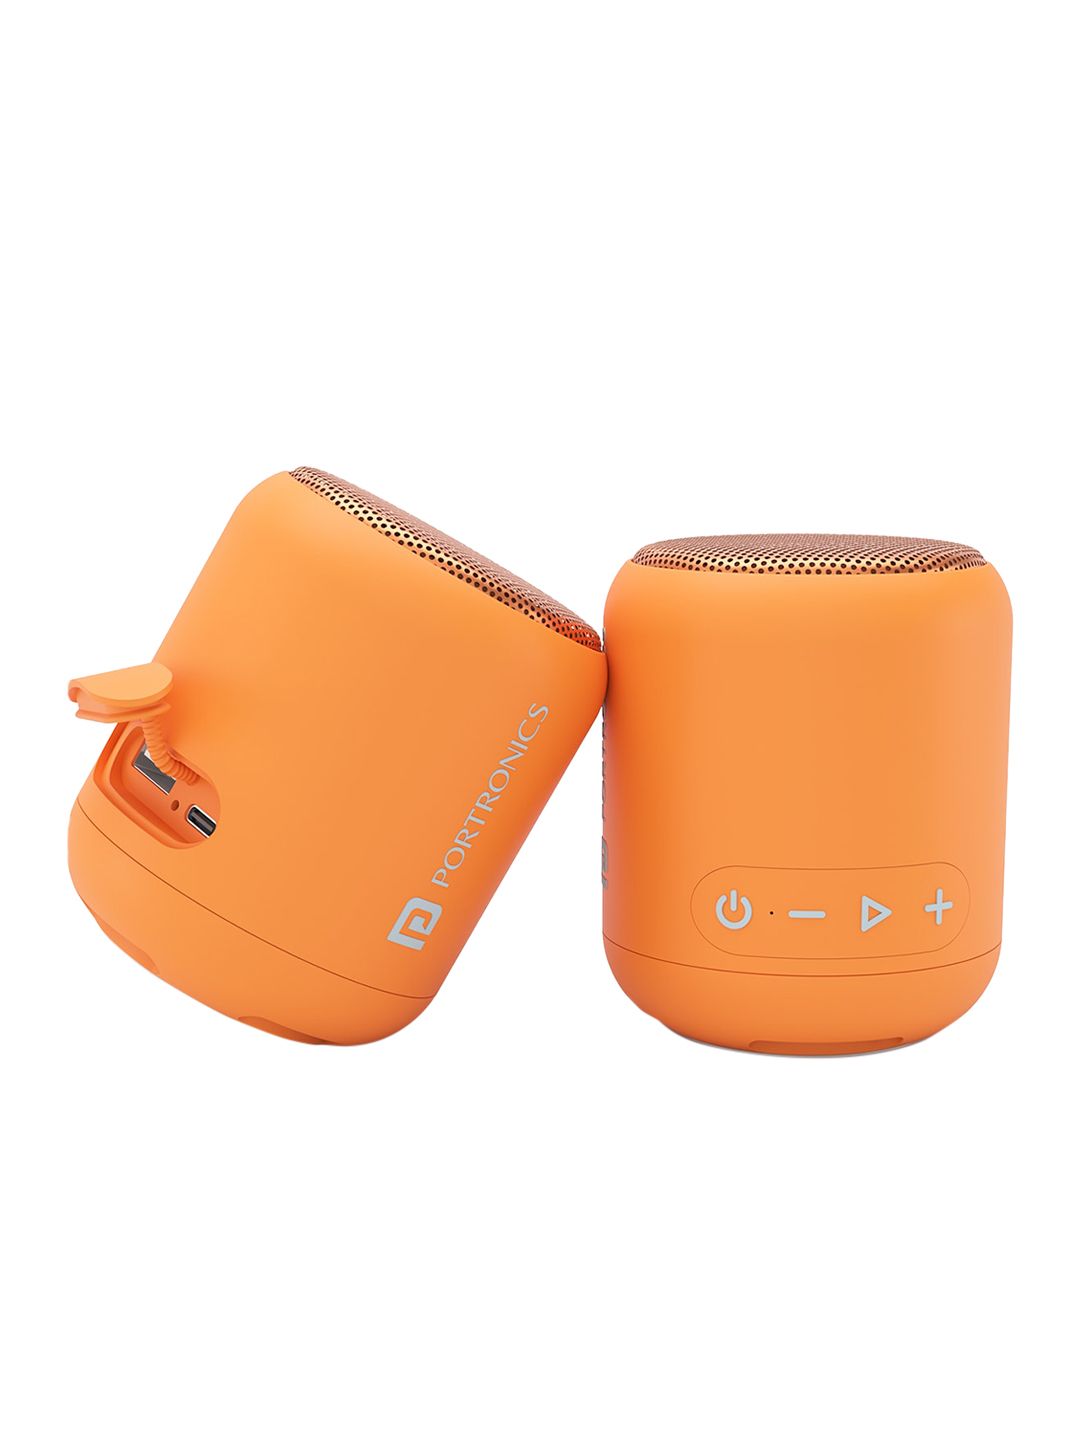 Portronics SoundDrum 1 10W Orange Water Resistant Wireless Bluetooth Portable Speakers Price in India